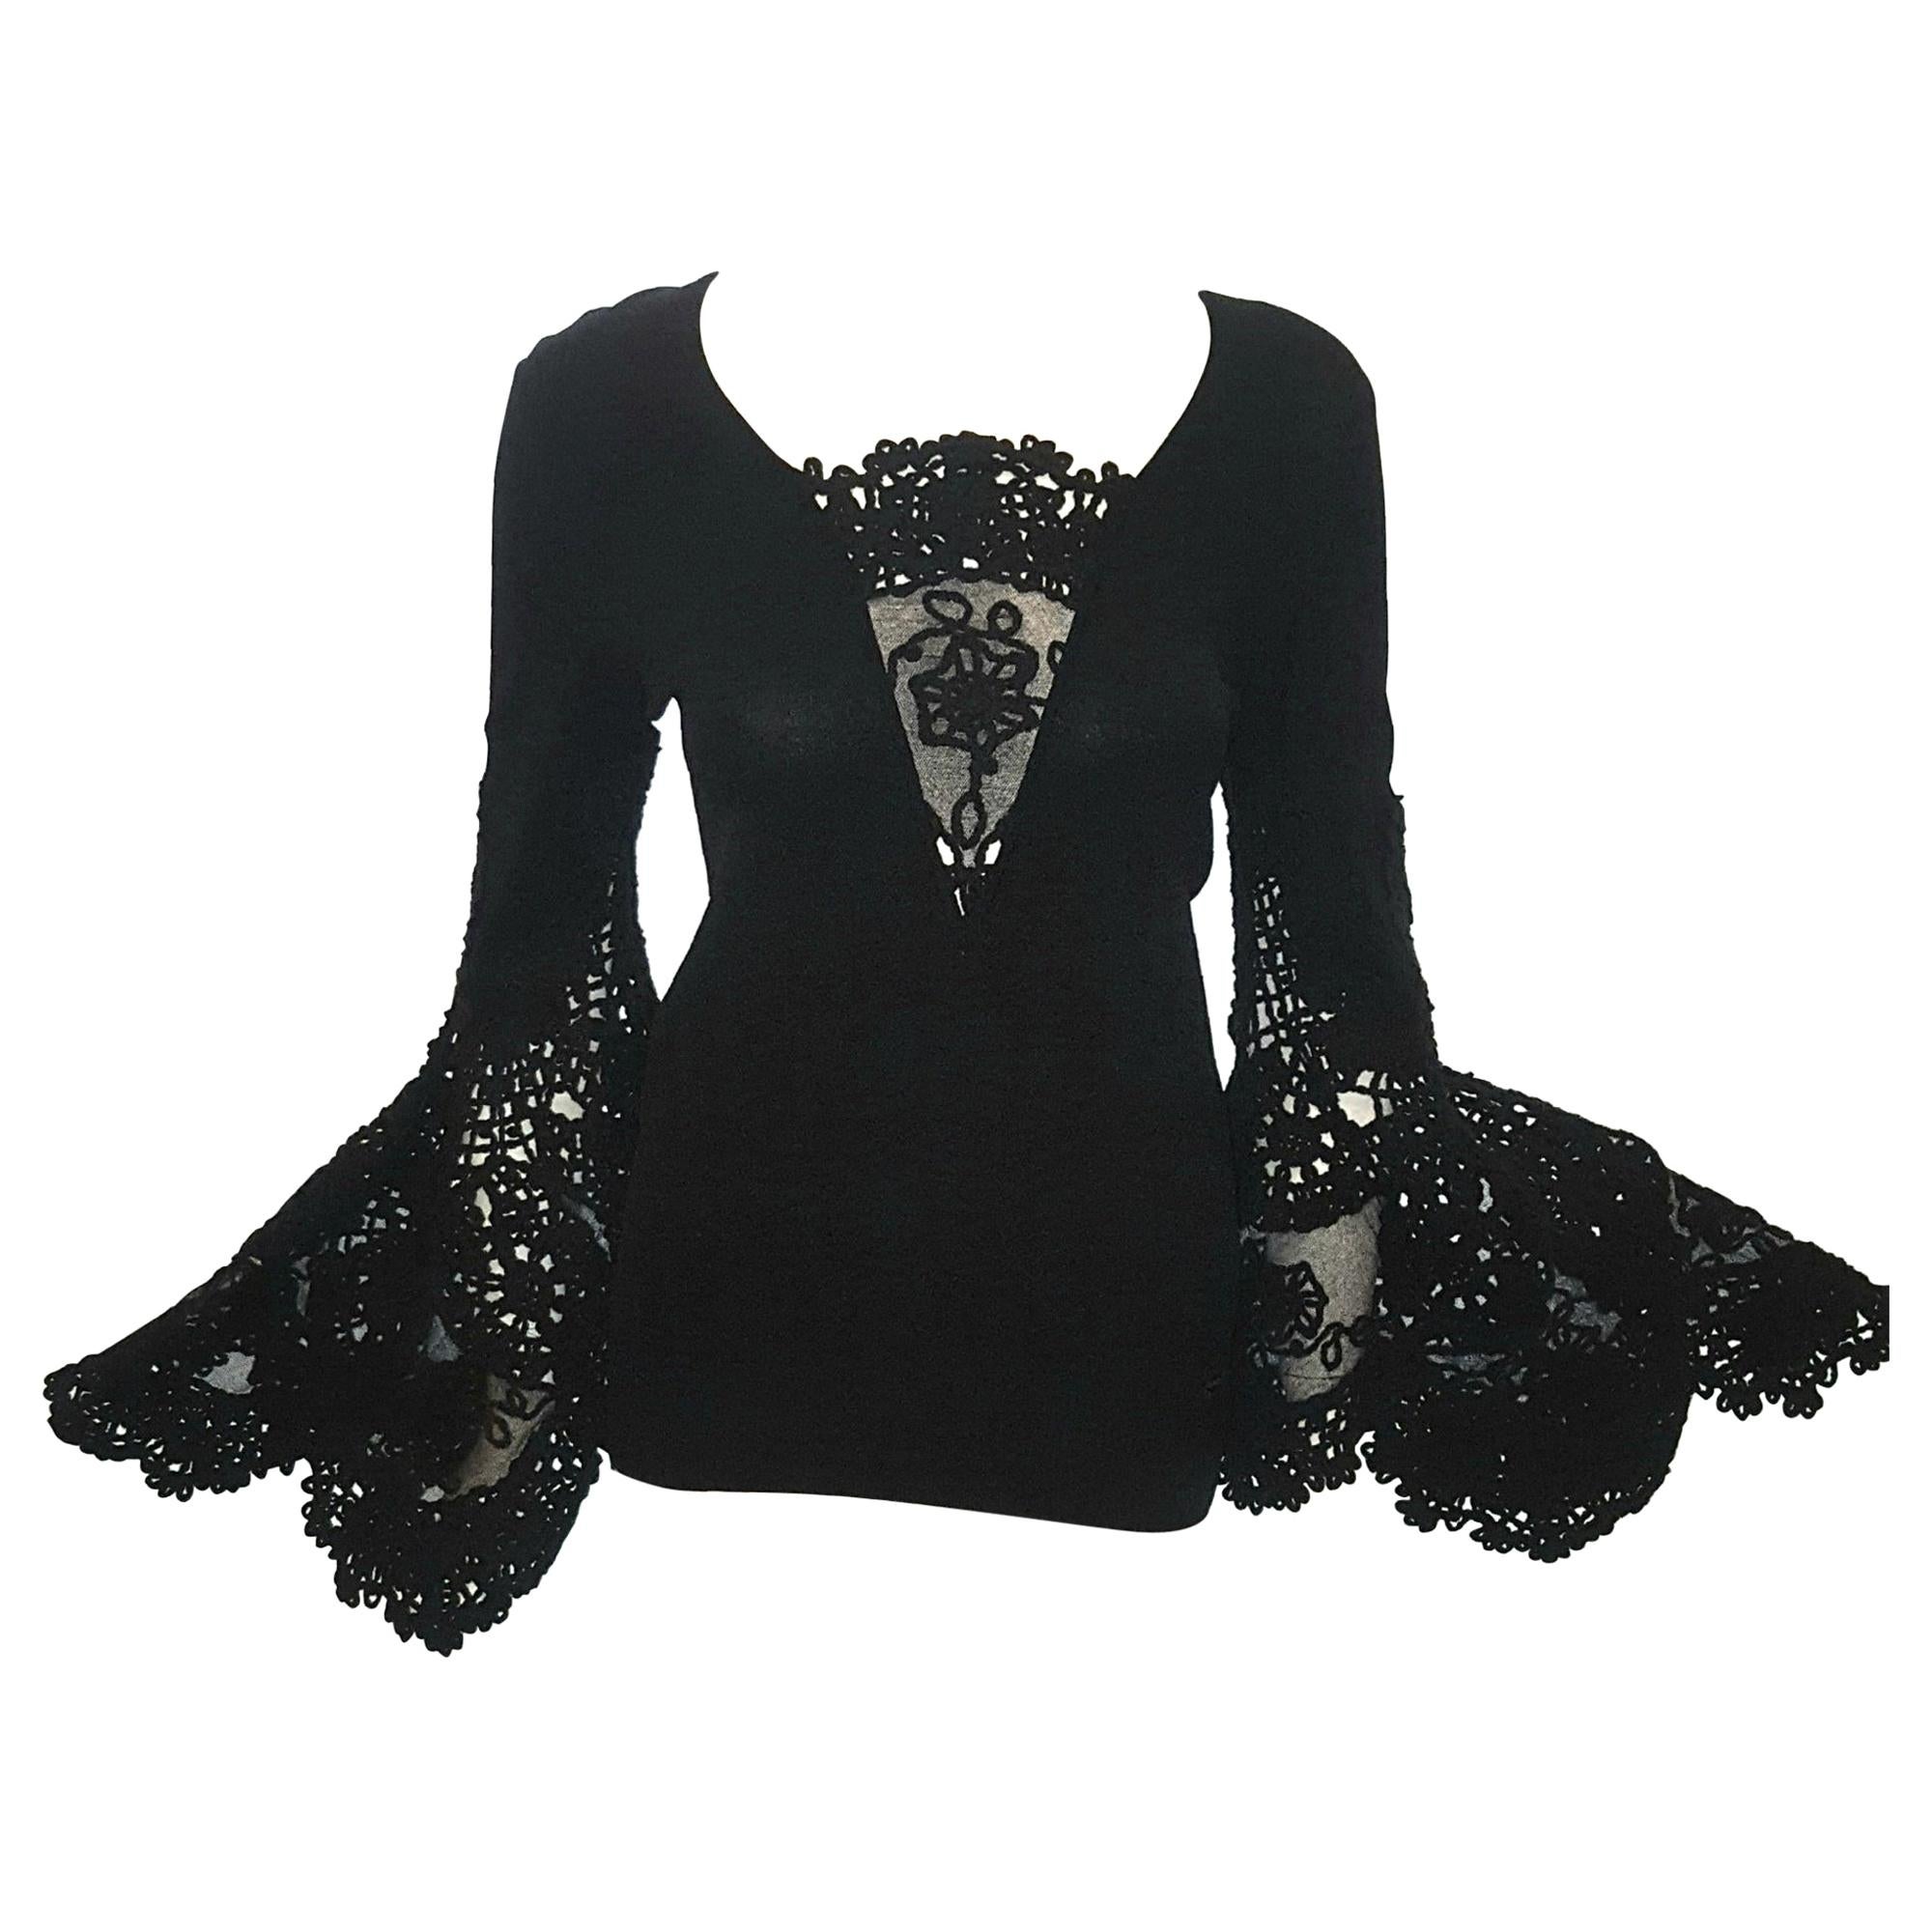 Chanel Black Crocheted Sweater W/ Long Sleeve Finishing at Extreme Bell Sleeves